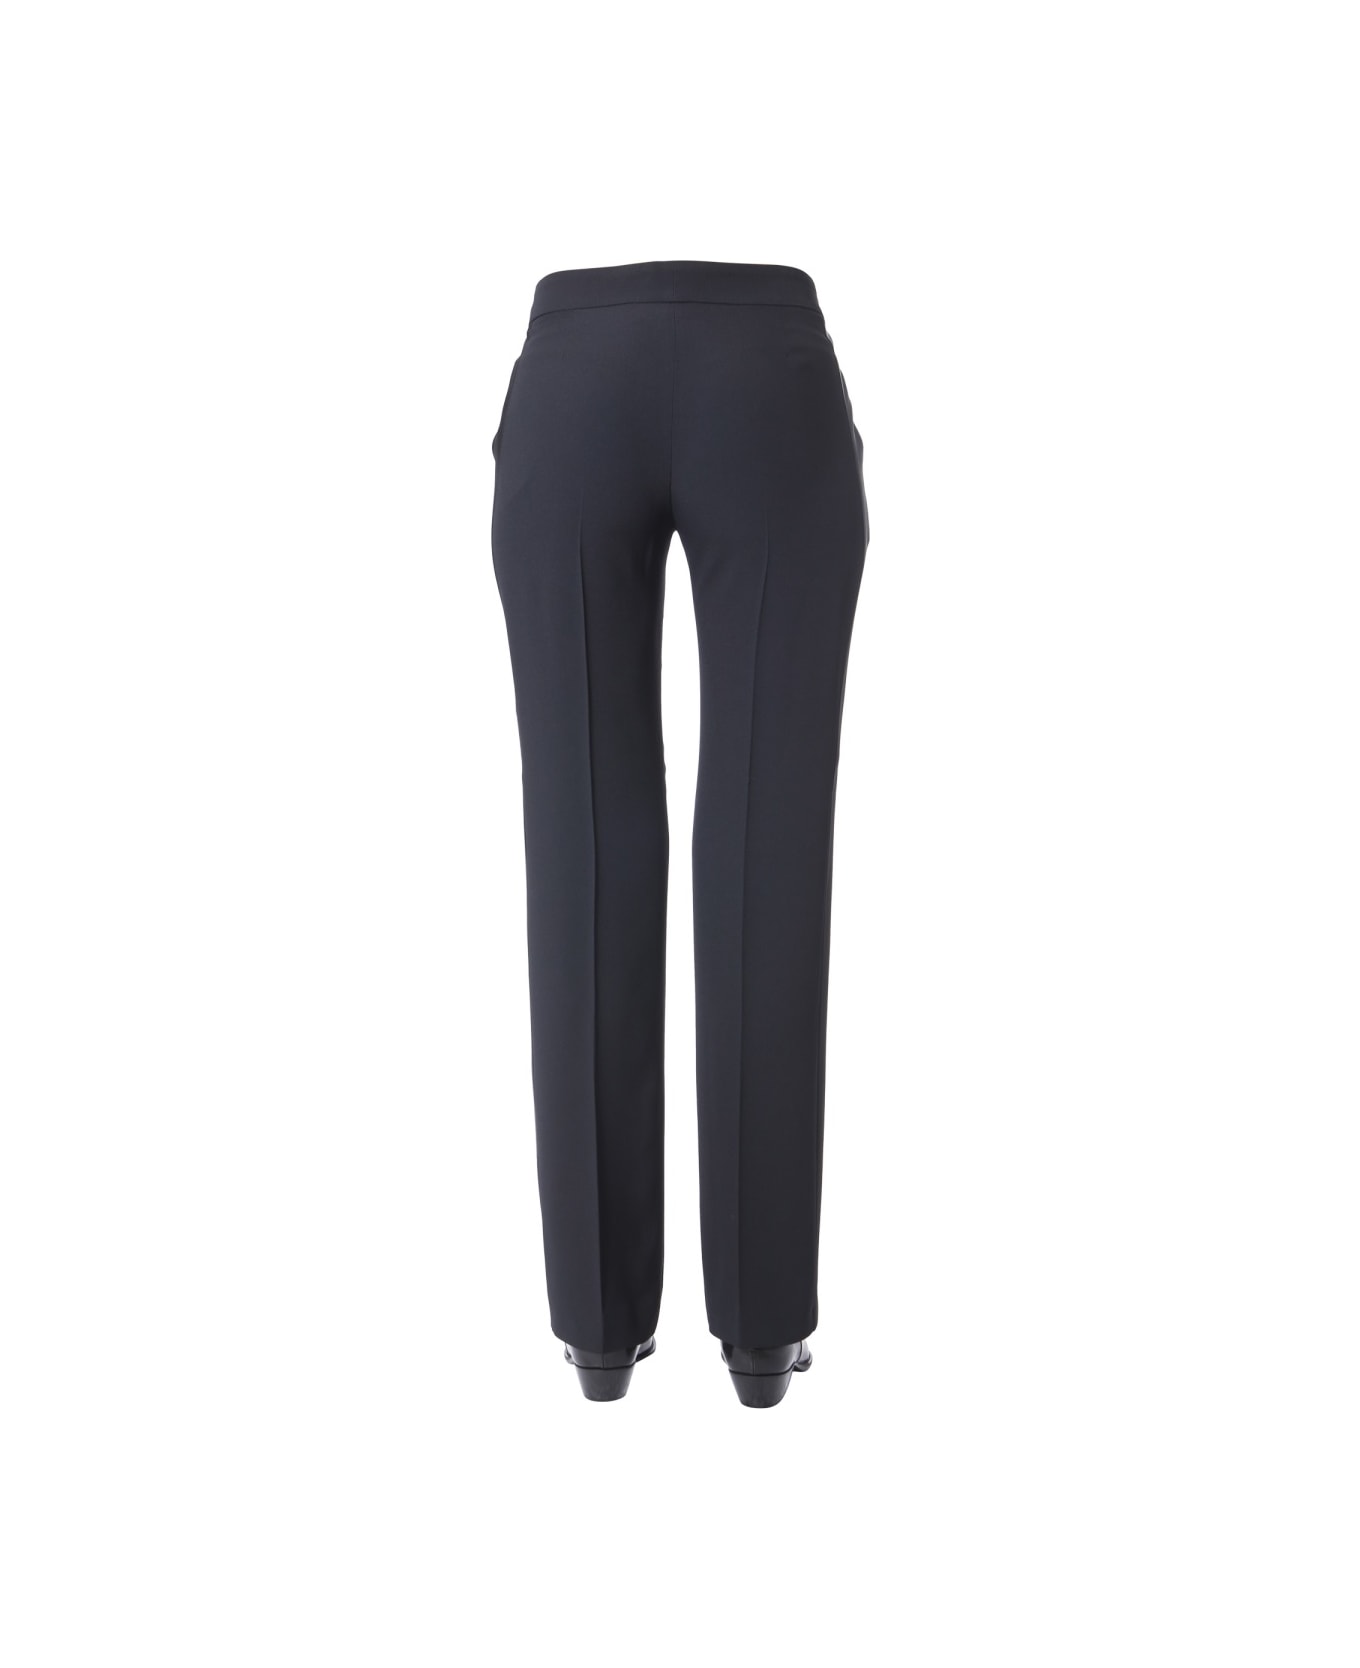 N.21 Pants With Side Band - BLACK